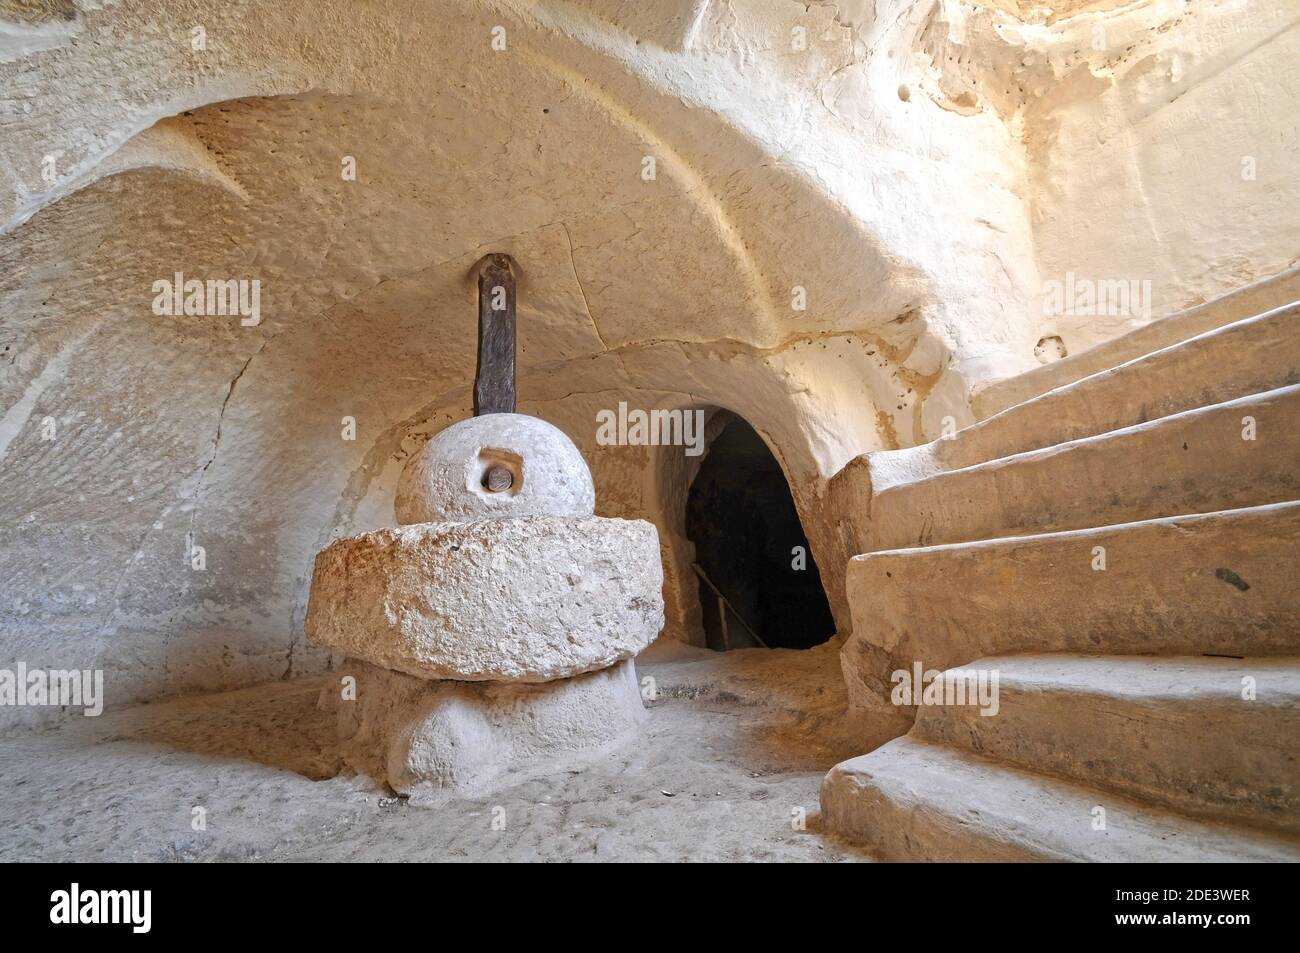 Beit Guvrin caves wheat grinding stone, Israel Stock Photo